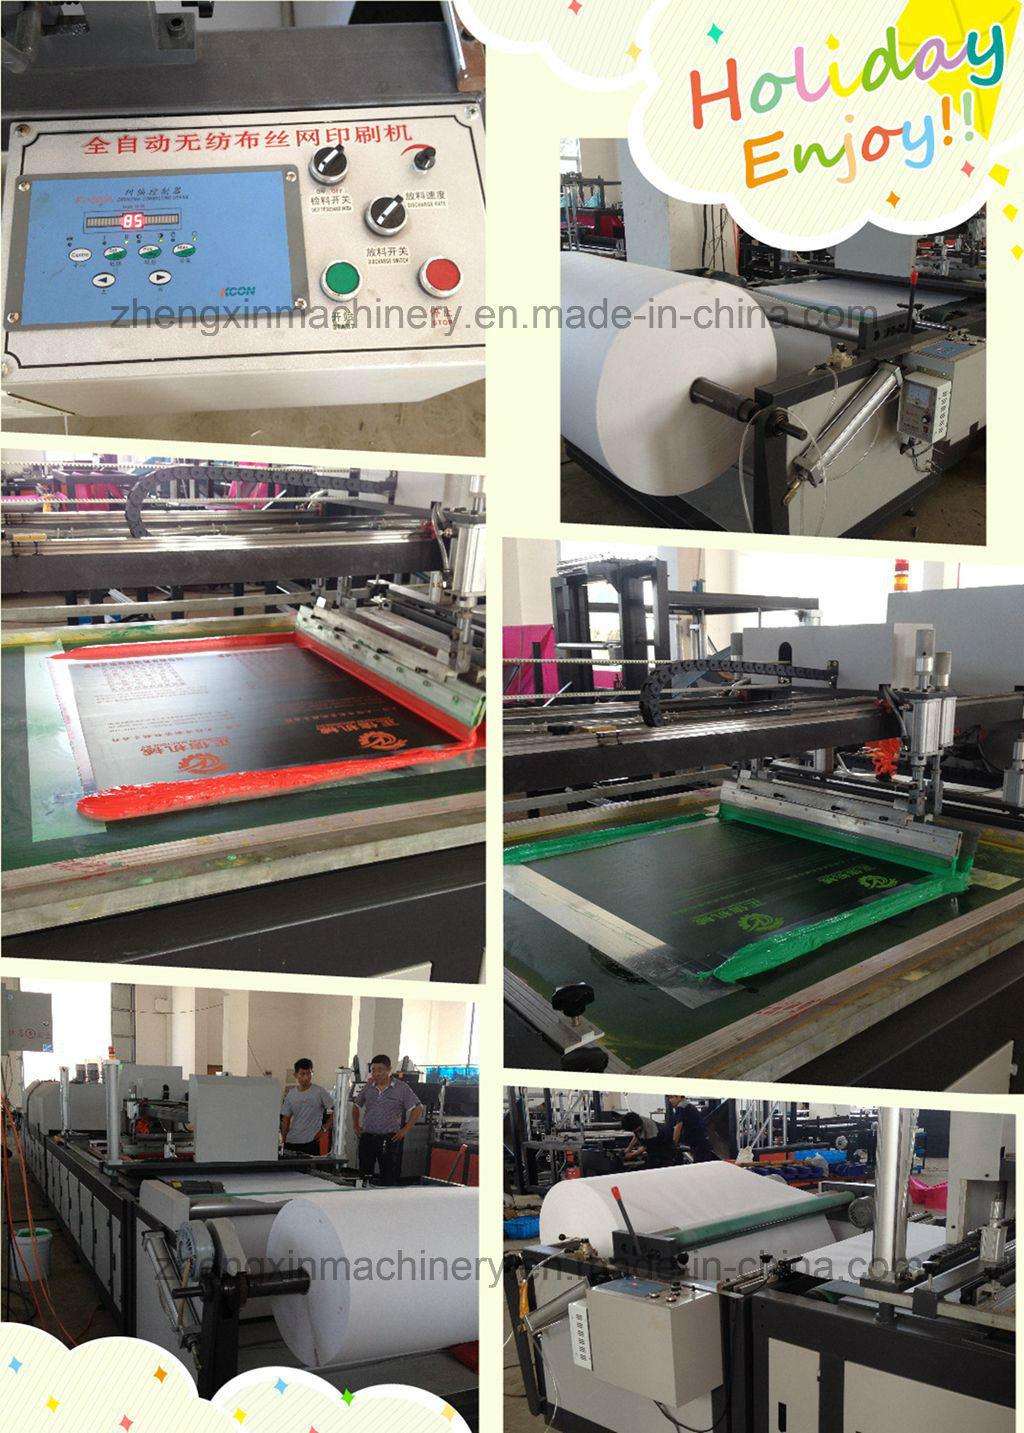 Zxh-A1200 Non Woven Monochrome Screen Printing Machine with High Speed